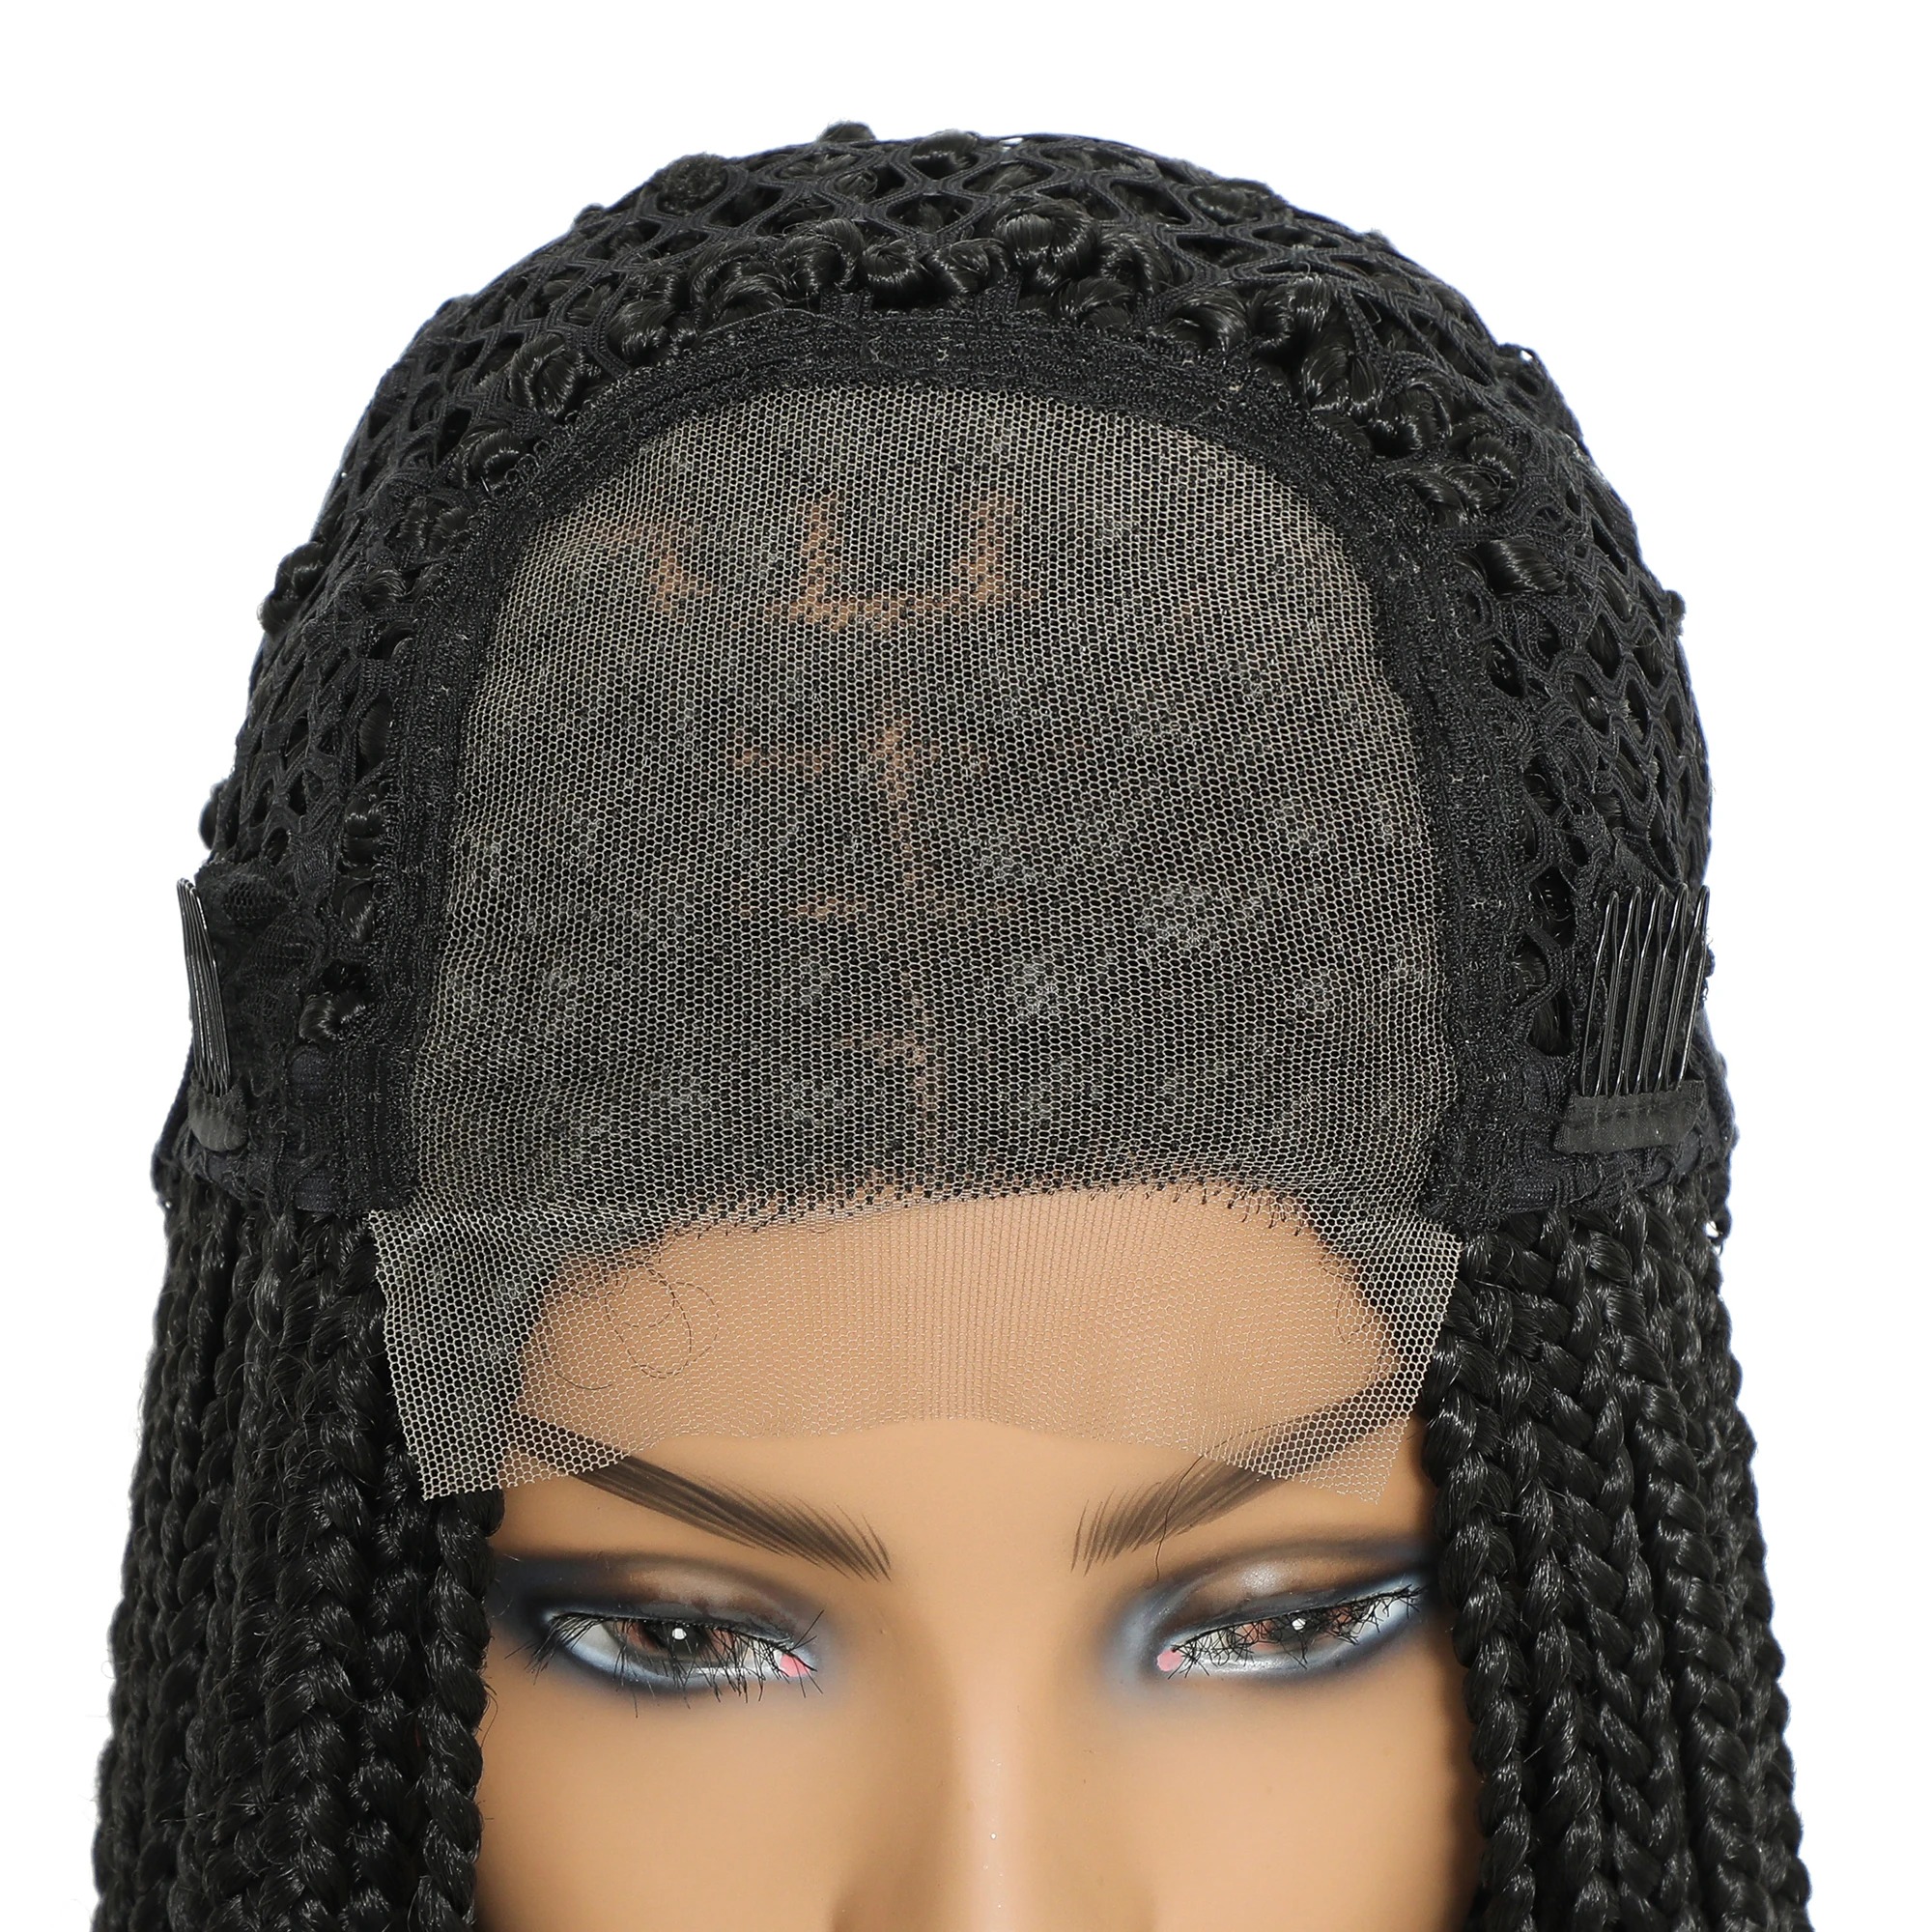 Long Ombre Box Braided 4x4 Lace Wigs with Baby Hair Twist Braids Lace Front Wigs for Black Women Synthetic Cosplay Wig 30Inch